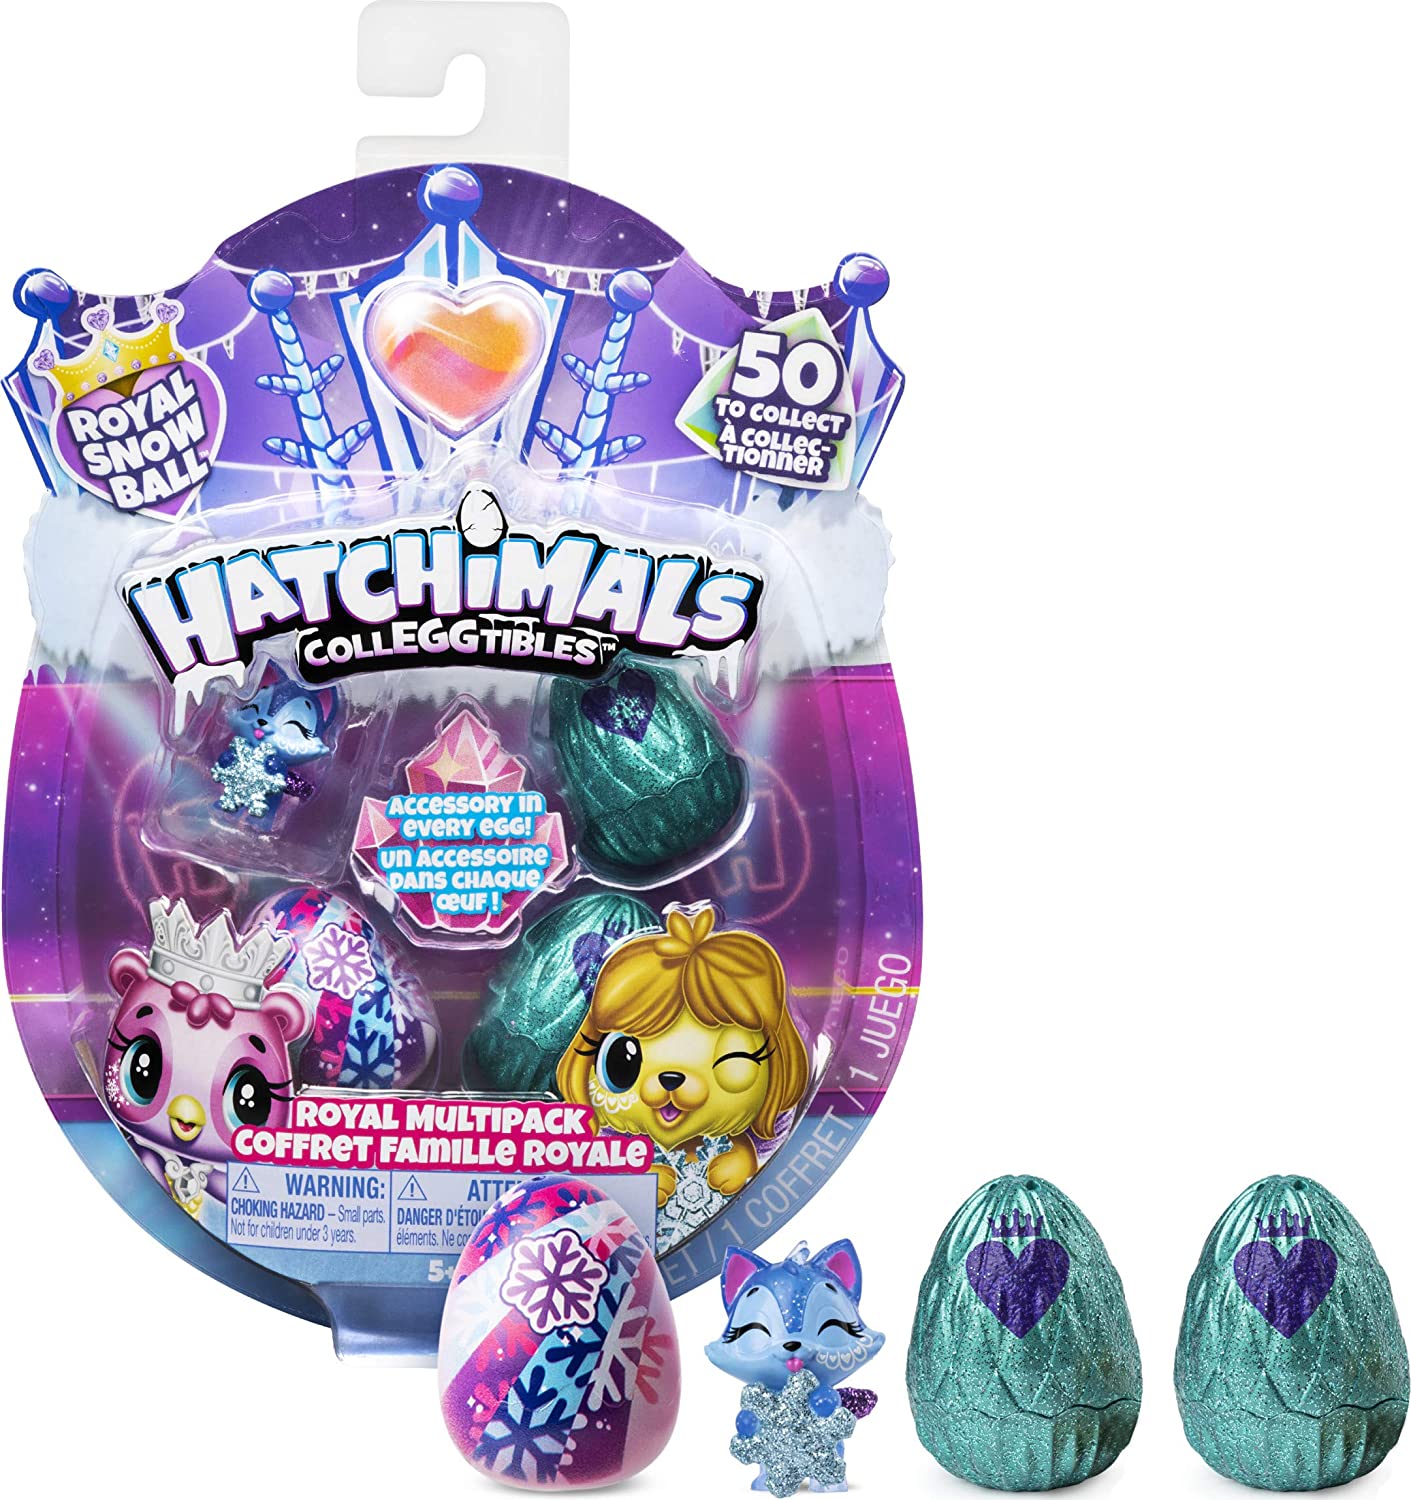 https://becomeacouponqueen.com/wp-content/uploads/2020/10/Hatchimals-Colleggtibles-Royal-Multipack.jpg